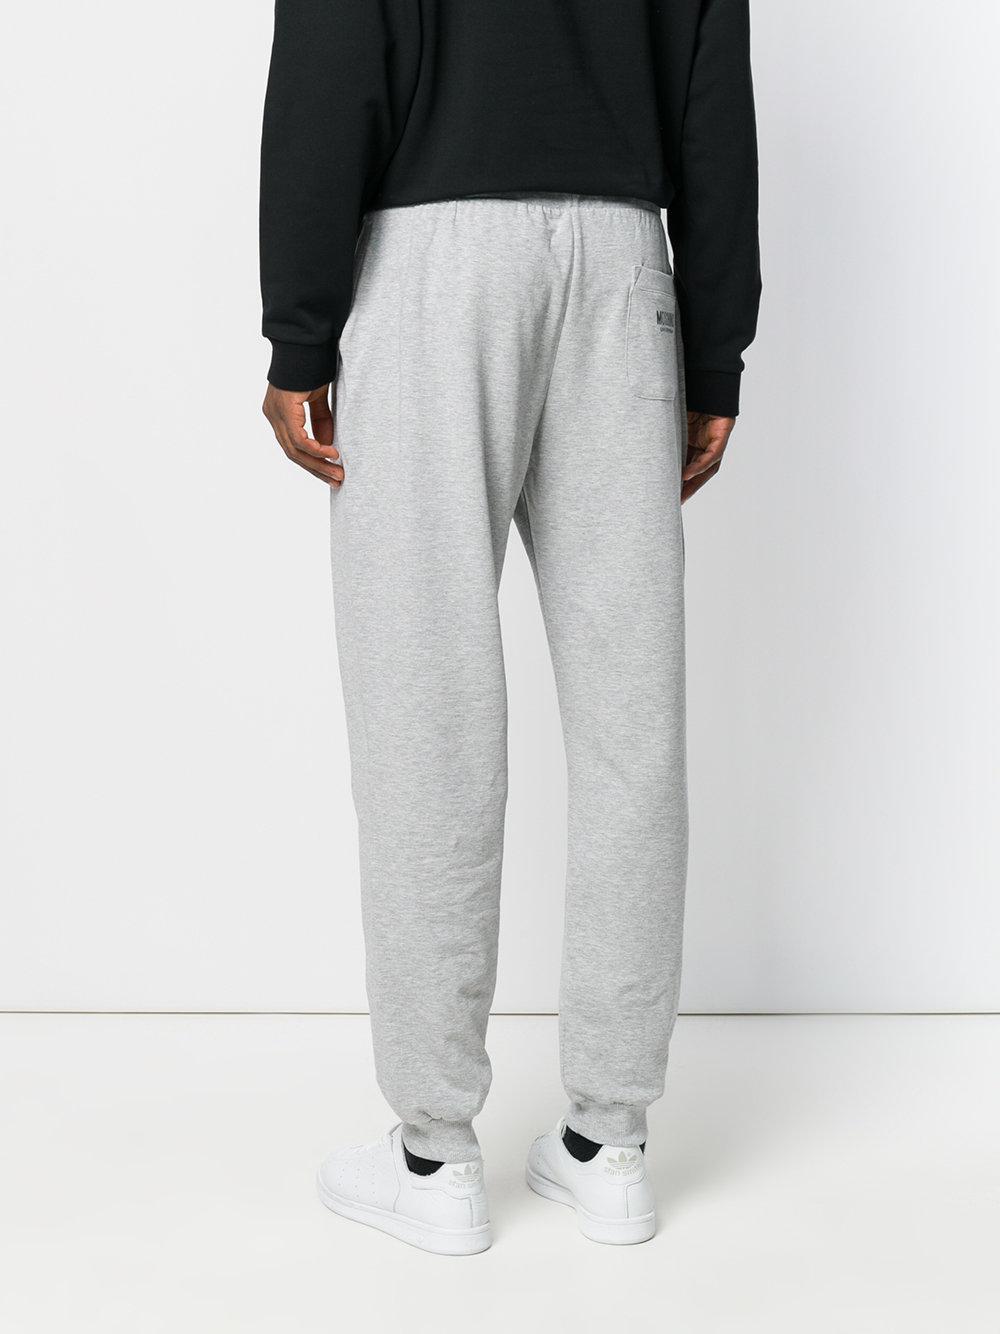 Moschino Cotton Logo Tracksuit Bottoms in Grey (Grey) for Men - Lyst